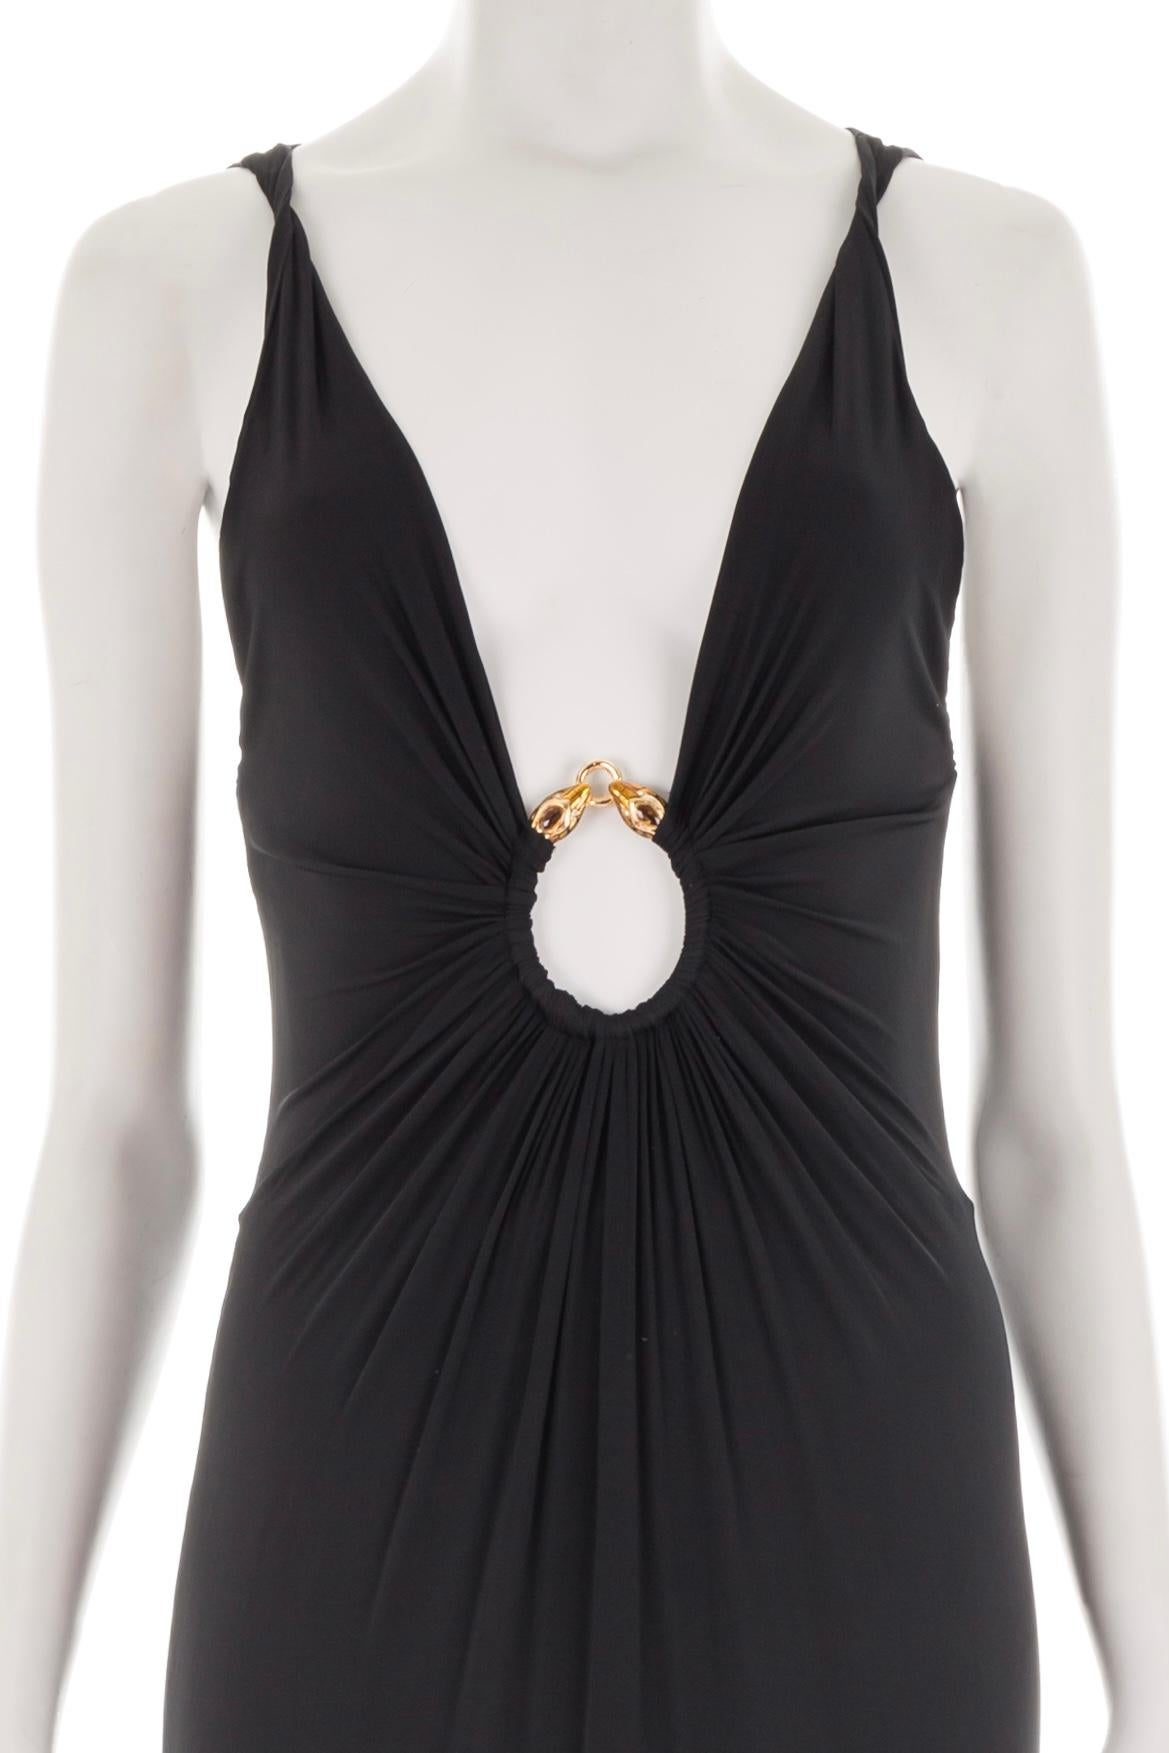 Roberto Cavalli F/W 2005 black plunging dress with gold snake ring In Excellent Condition For Sale In Rome, IT